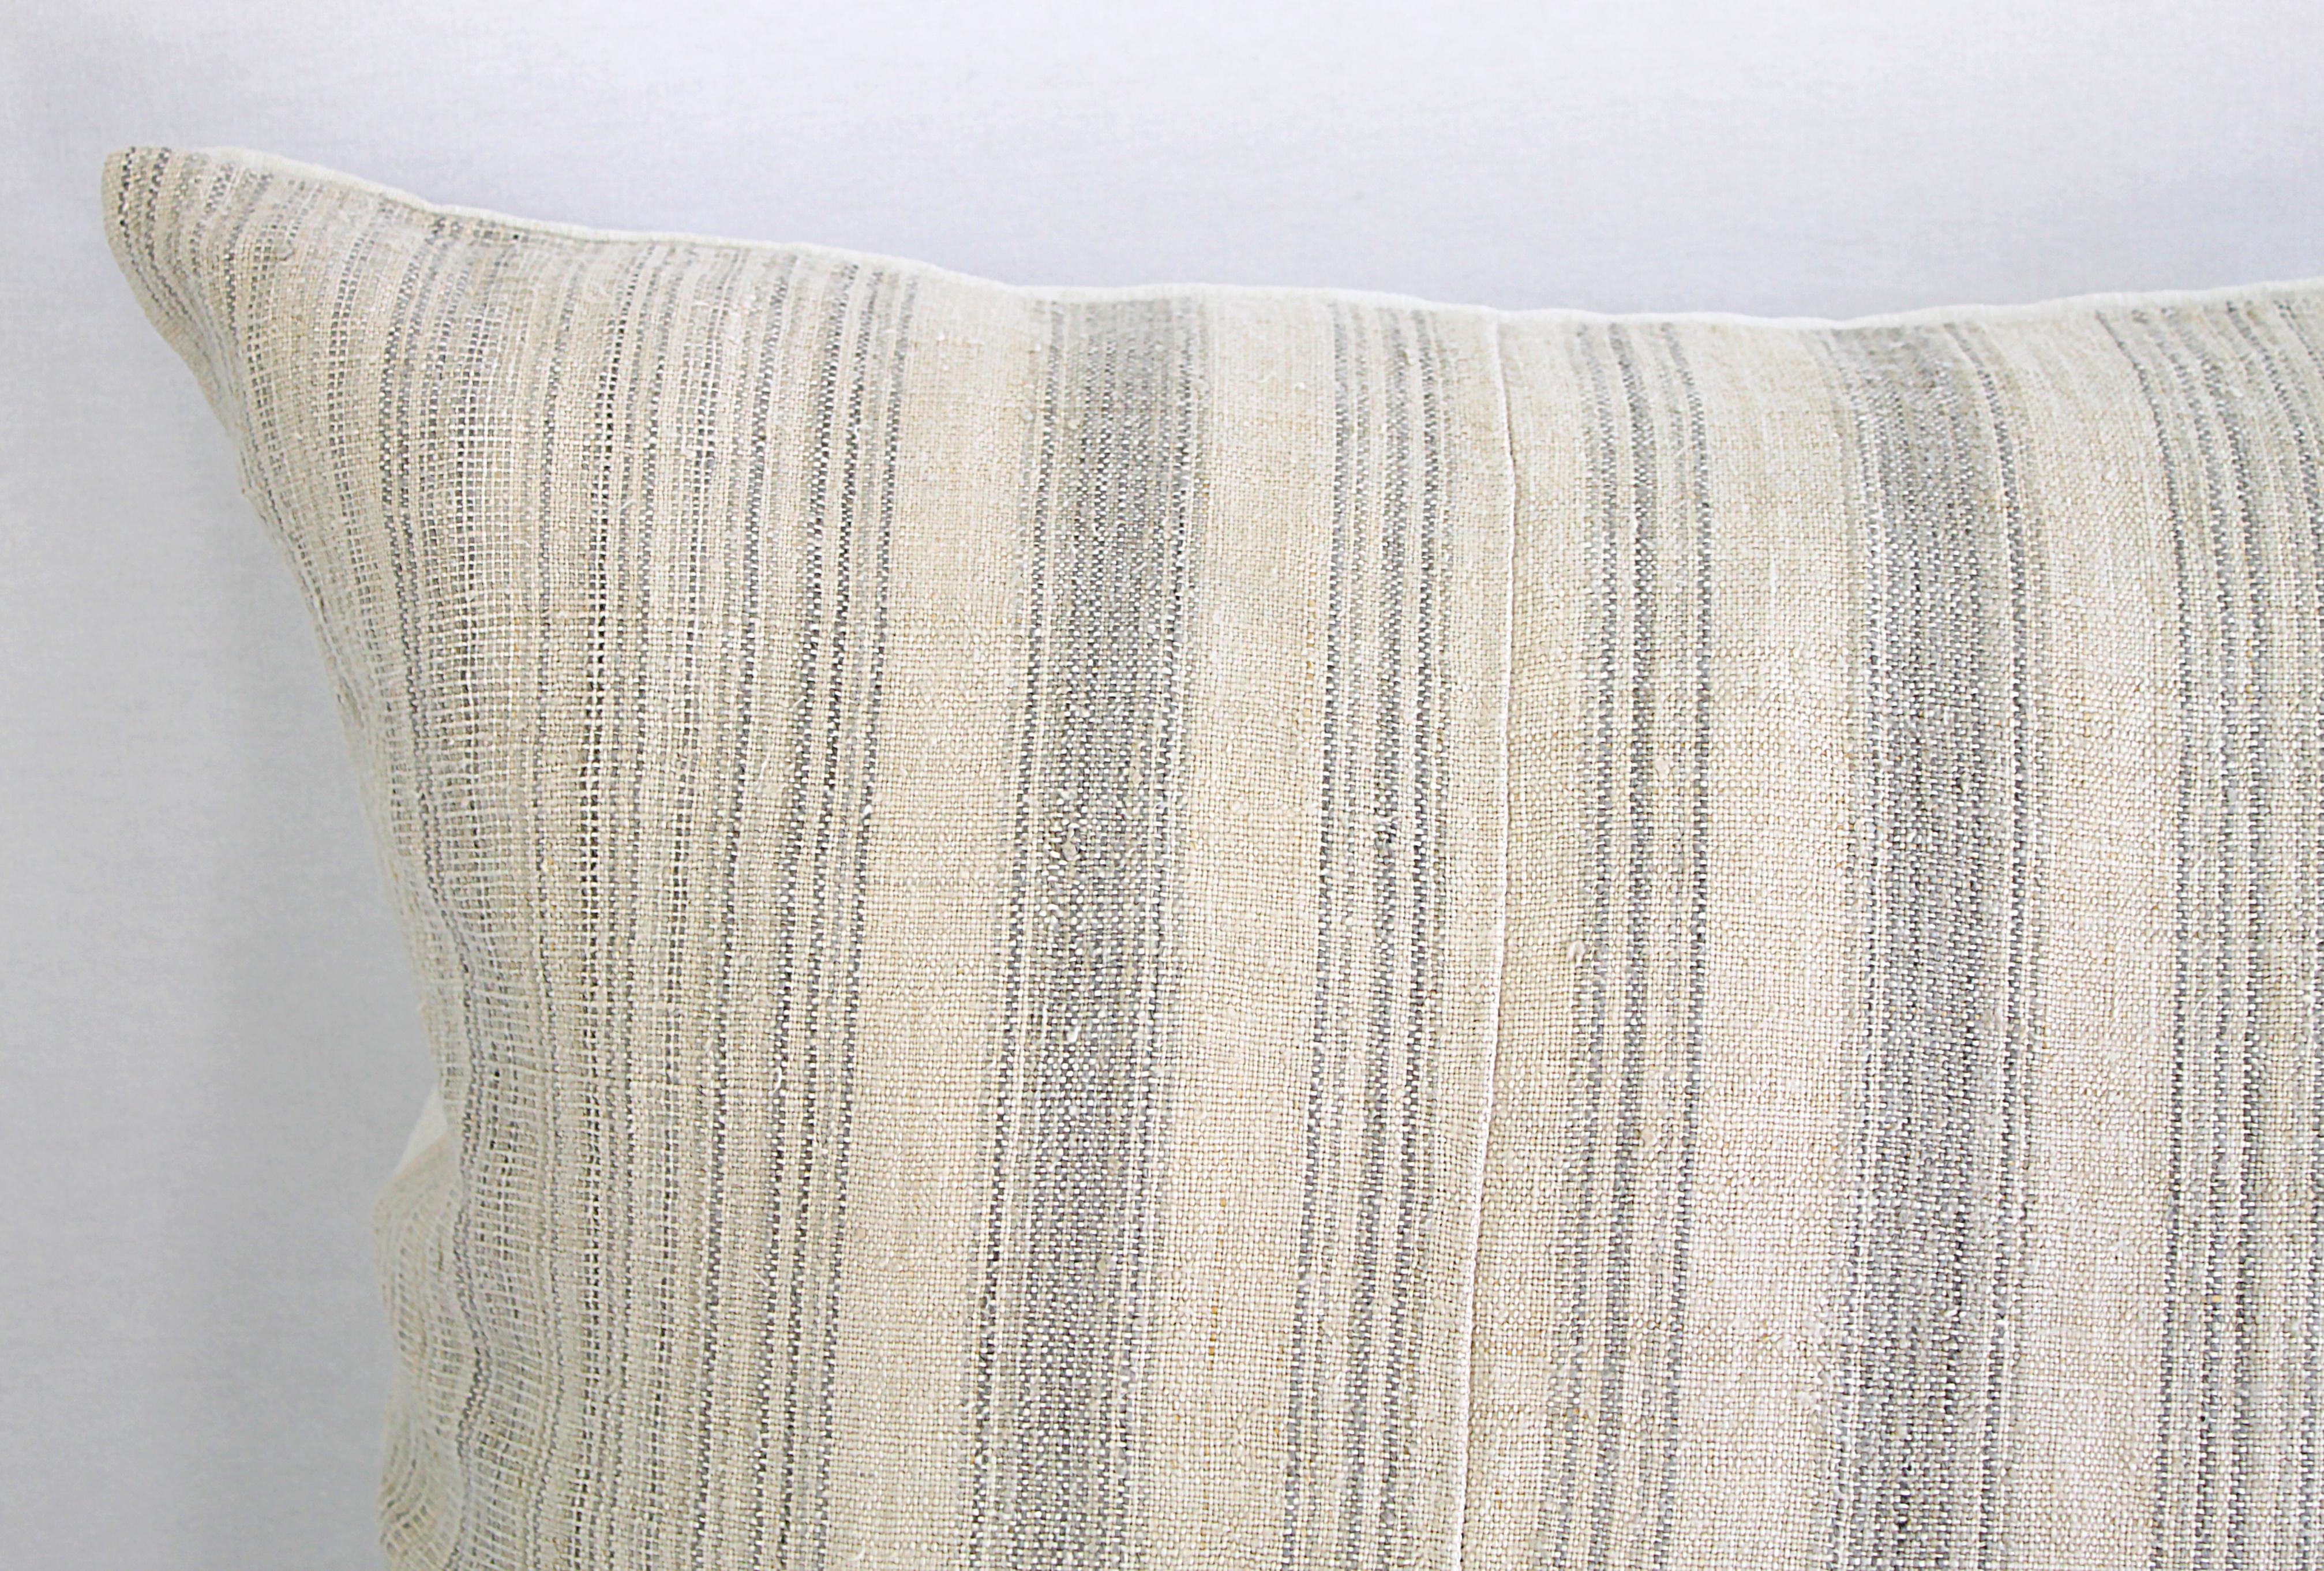 Antique homespun linen and striped grain sack pillow
Light grey and creamy white striped grain sack front, the backside is finished in a off white natural French linen. The front of the pillows are made from 19th century homespun linen, and the